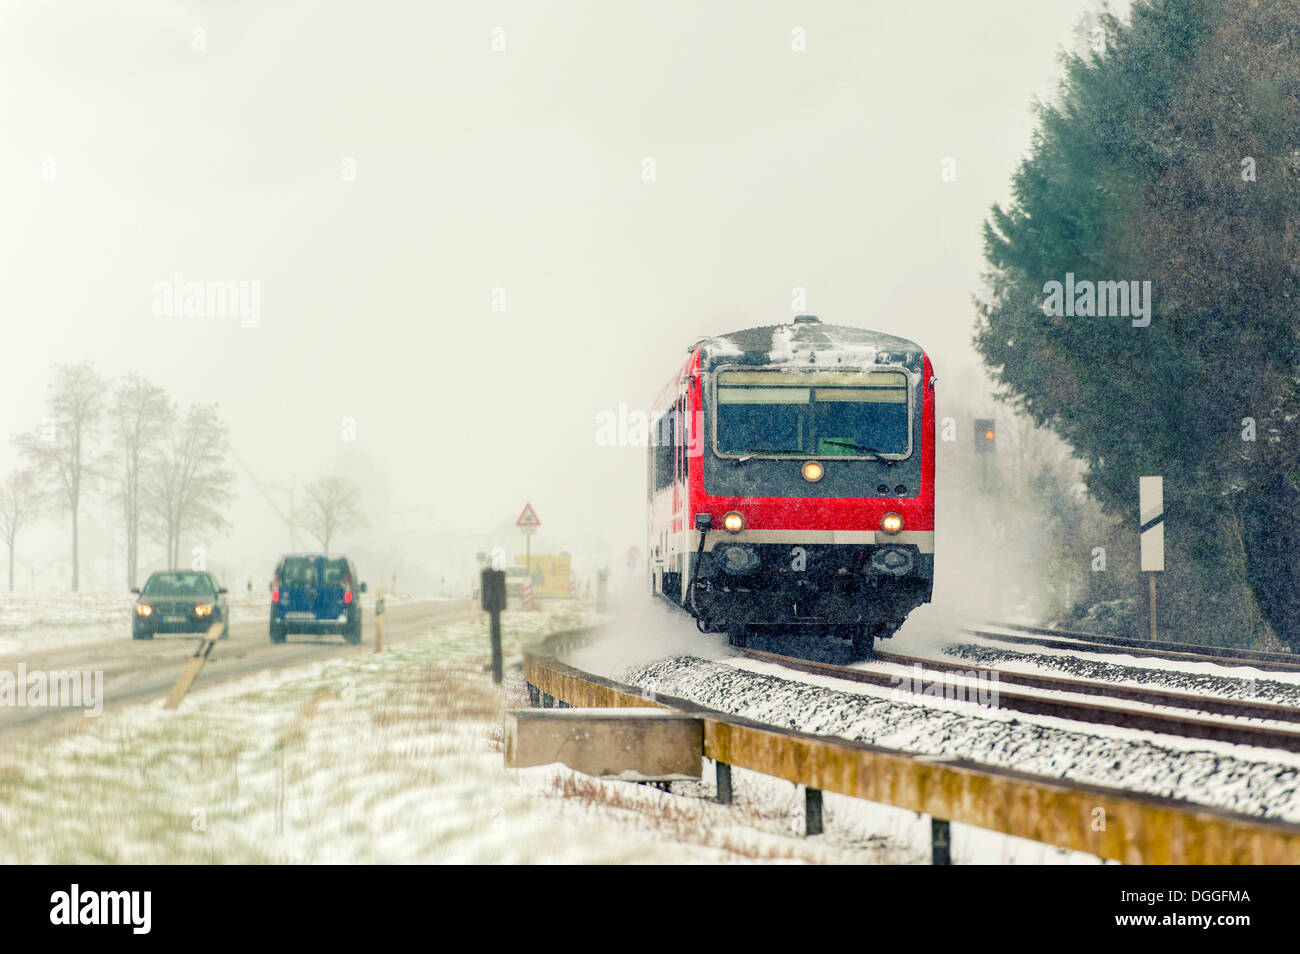 Road and rail transport in winter with snow, Grevenbroich, Rhineland, North Rhine-Westphalia, Germany Stock Photo